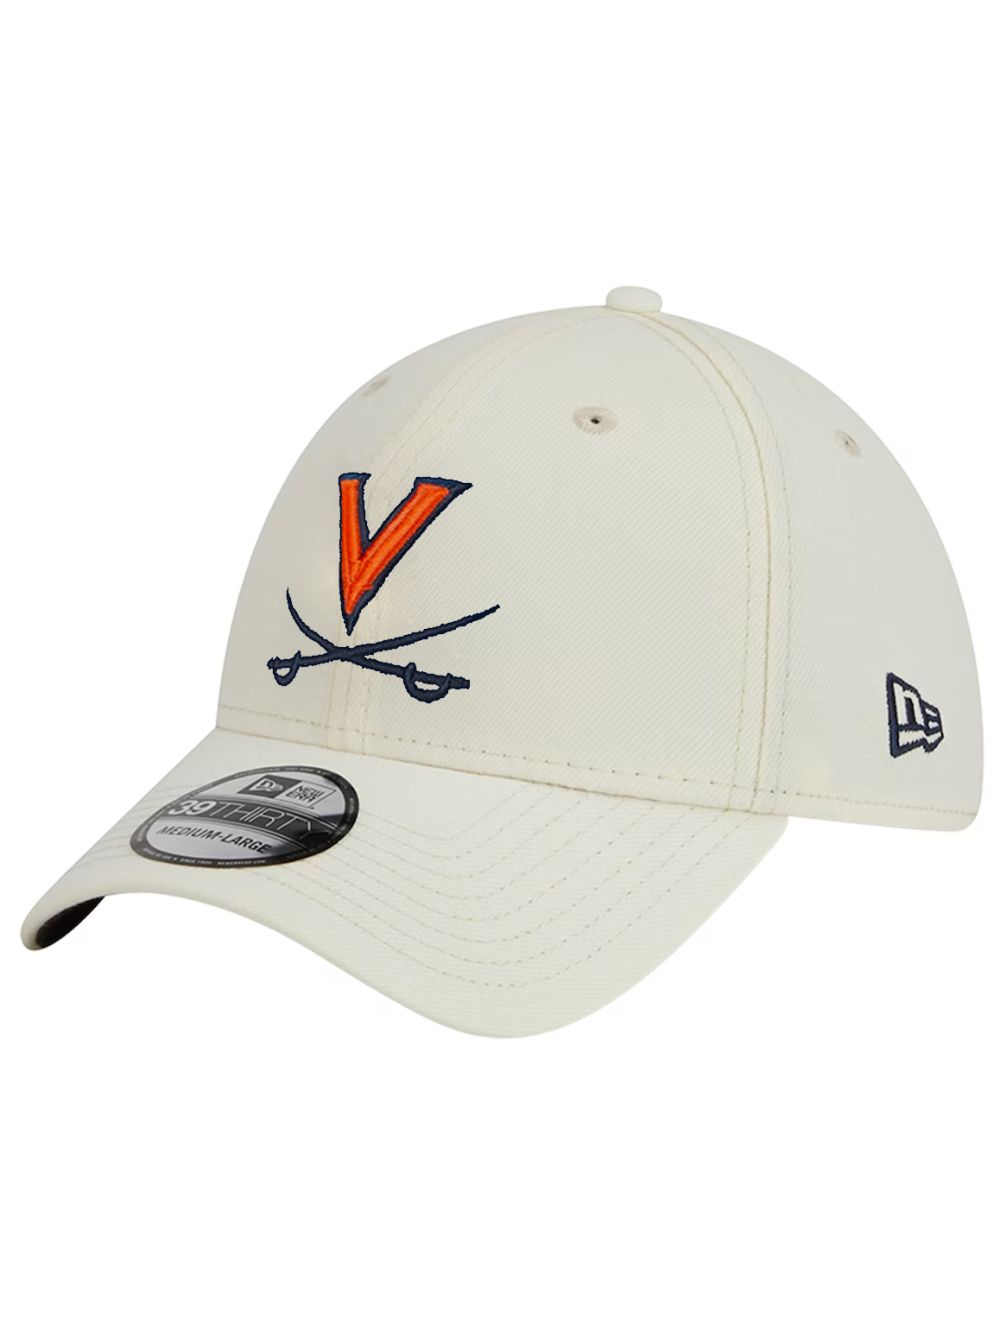 University of Virginia Fitted Hat, Virginia Cavaliers Fitted Caps